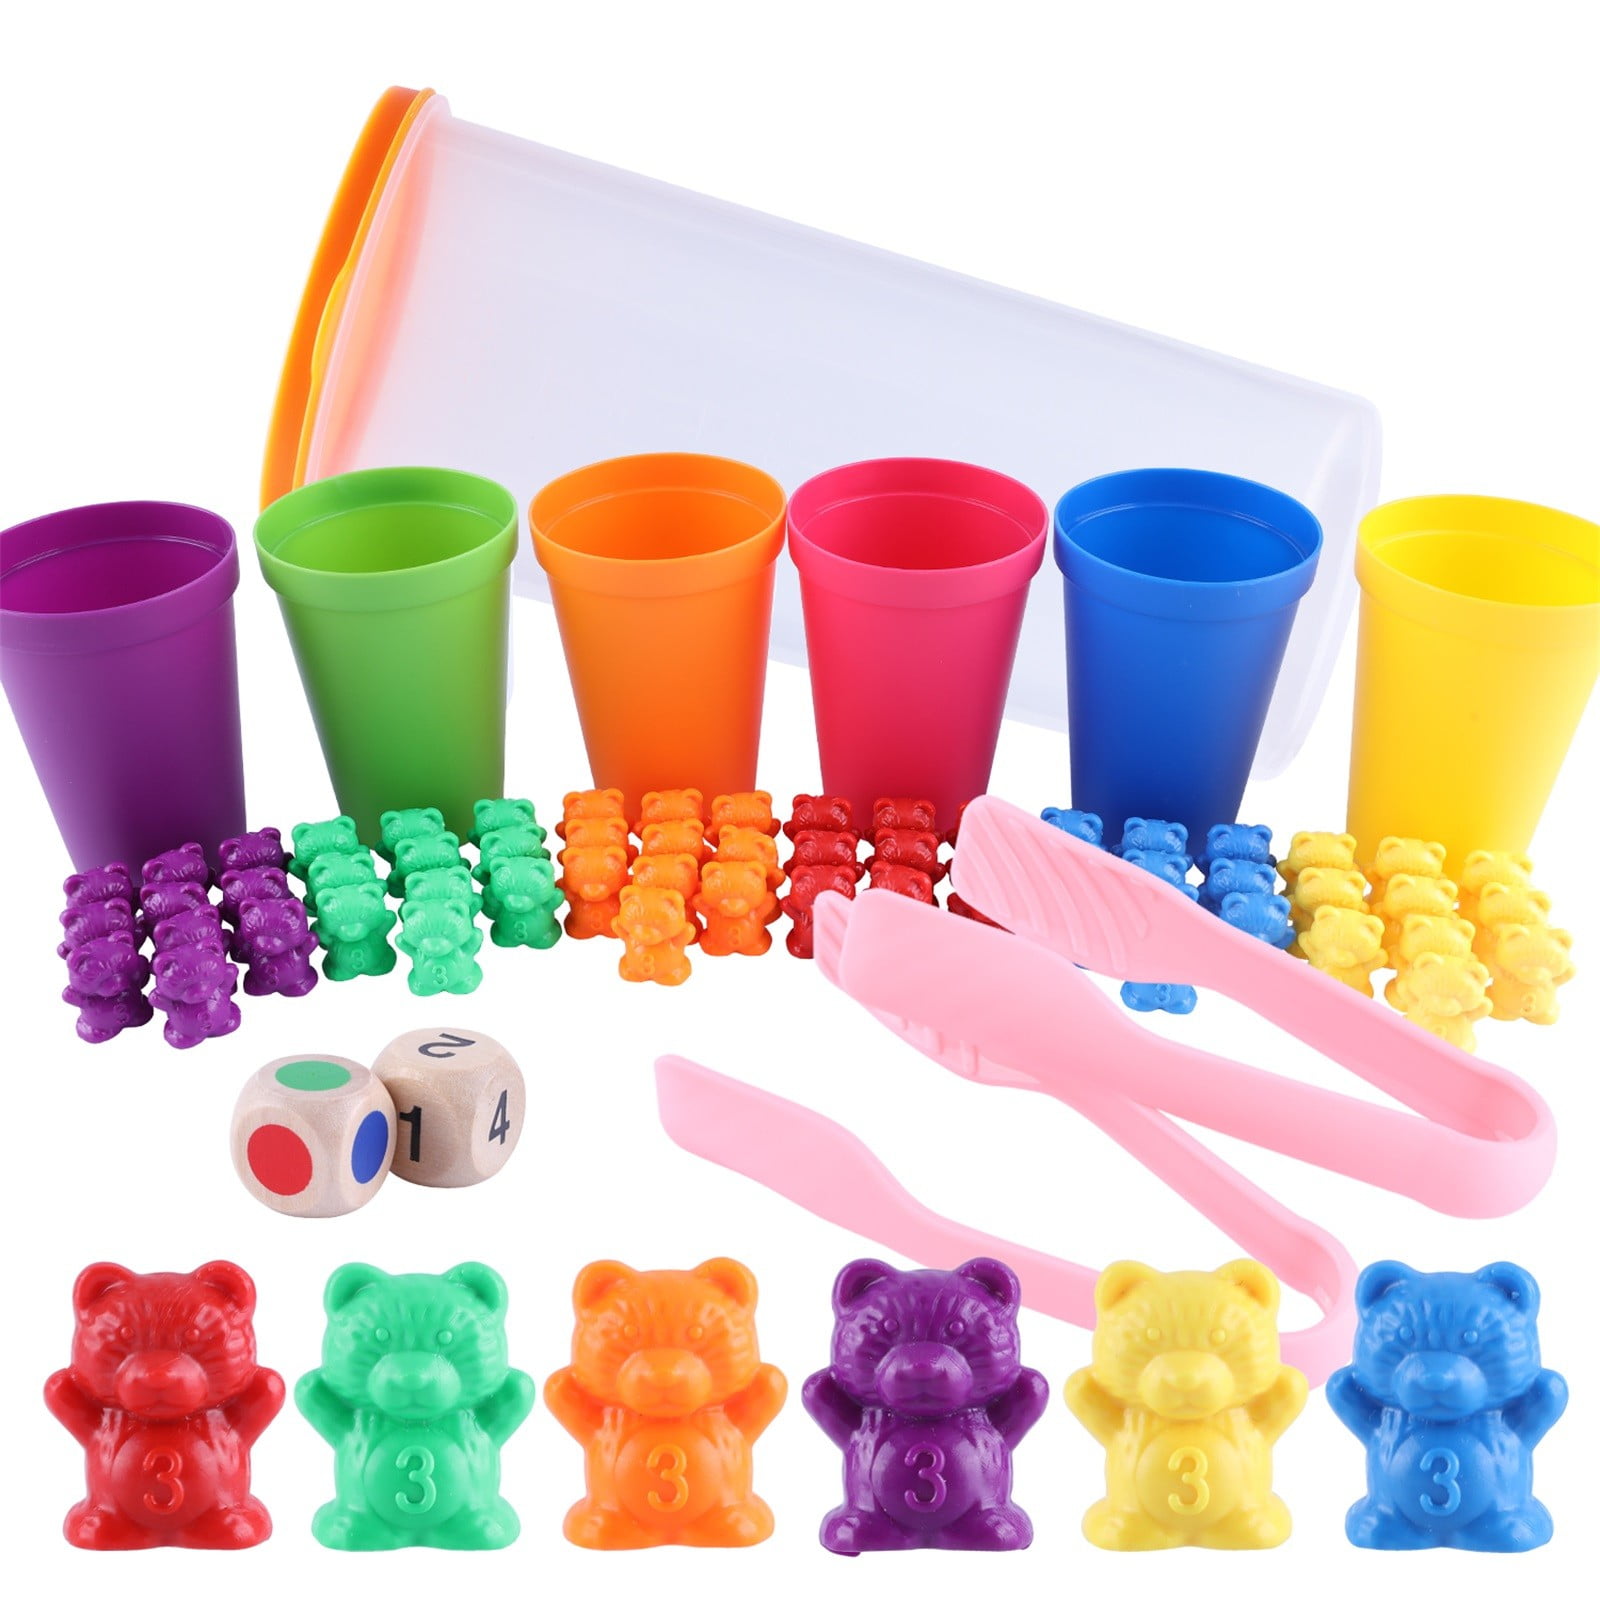 72pcs Rainbow Counting Bears  Set with Matching Sorting Cups Dices and Tweezers 